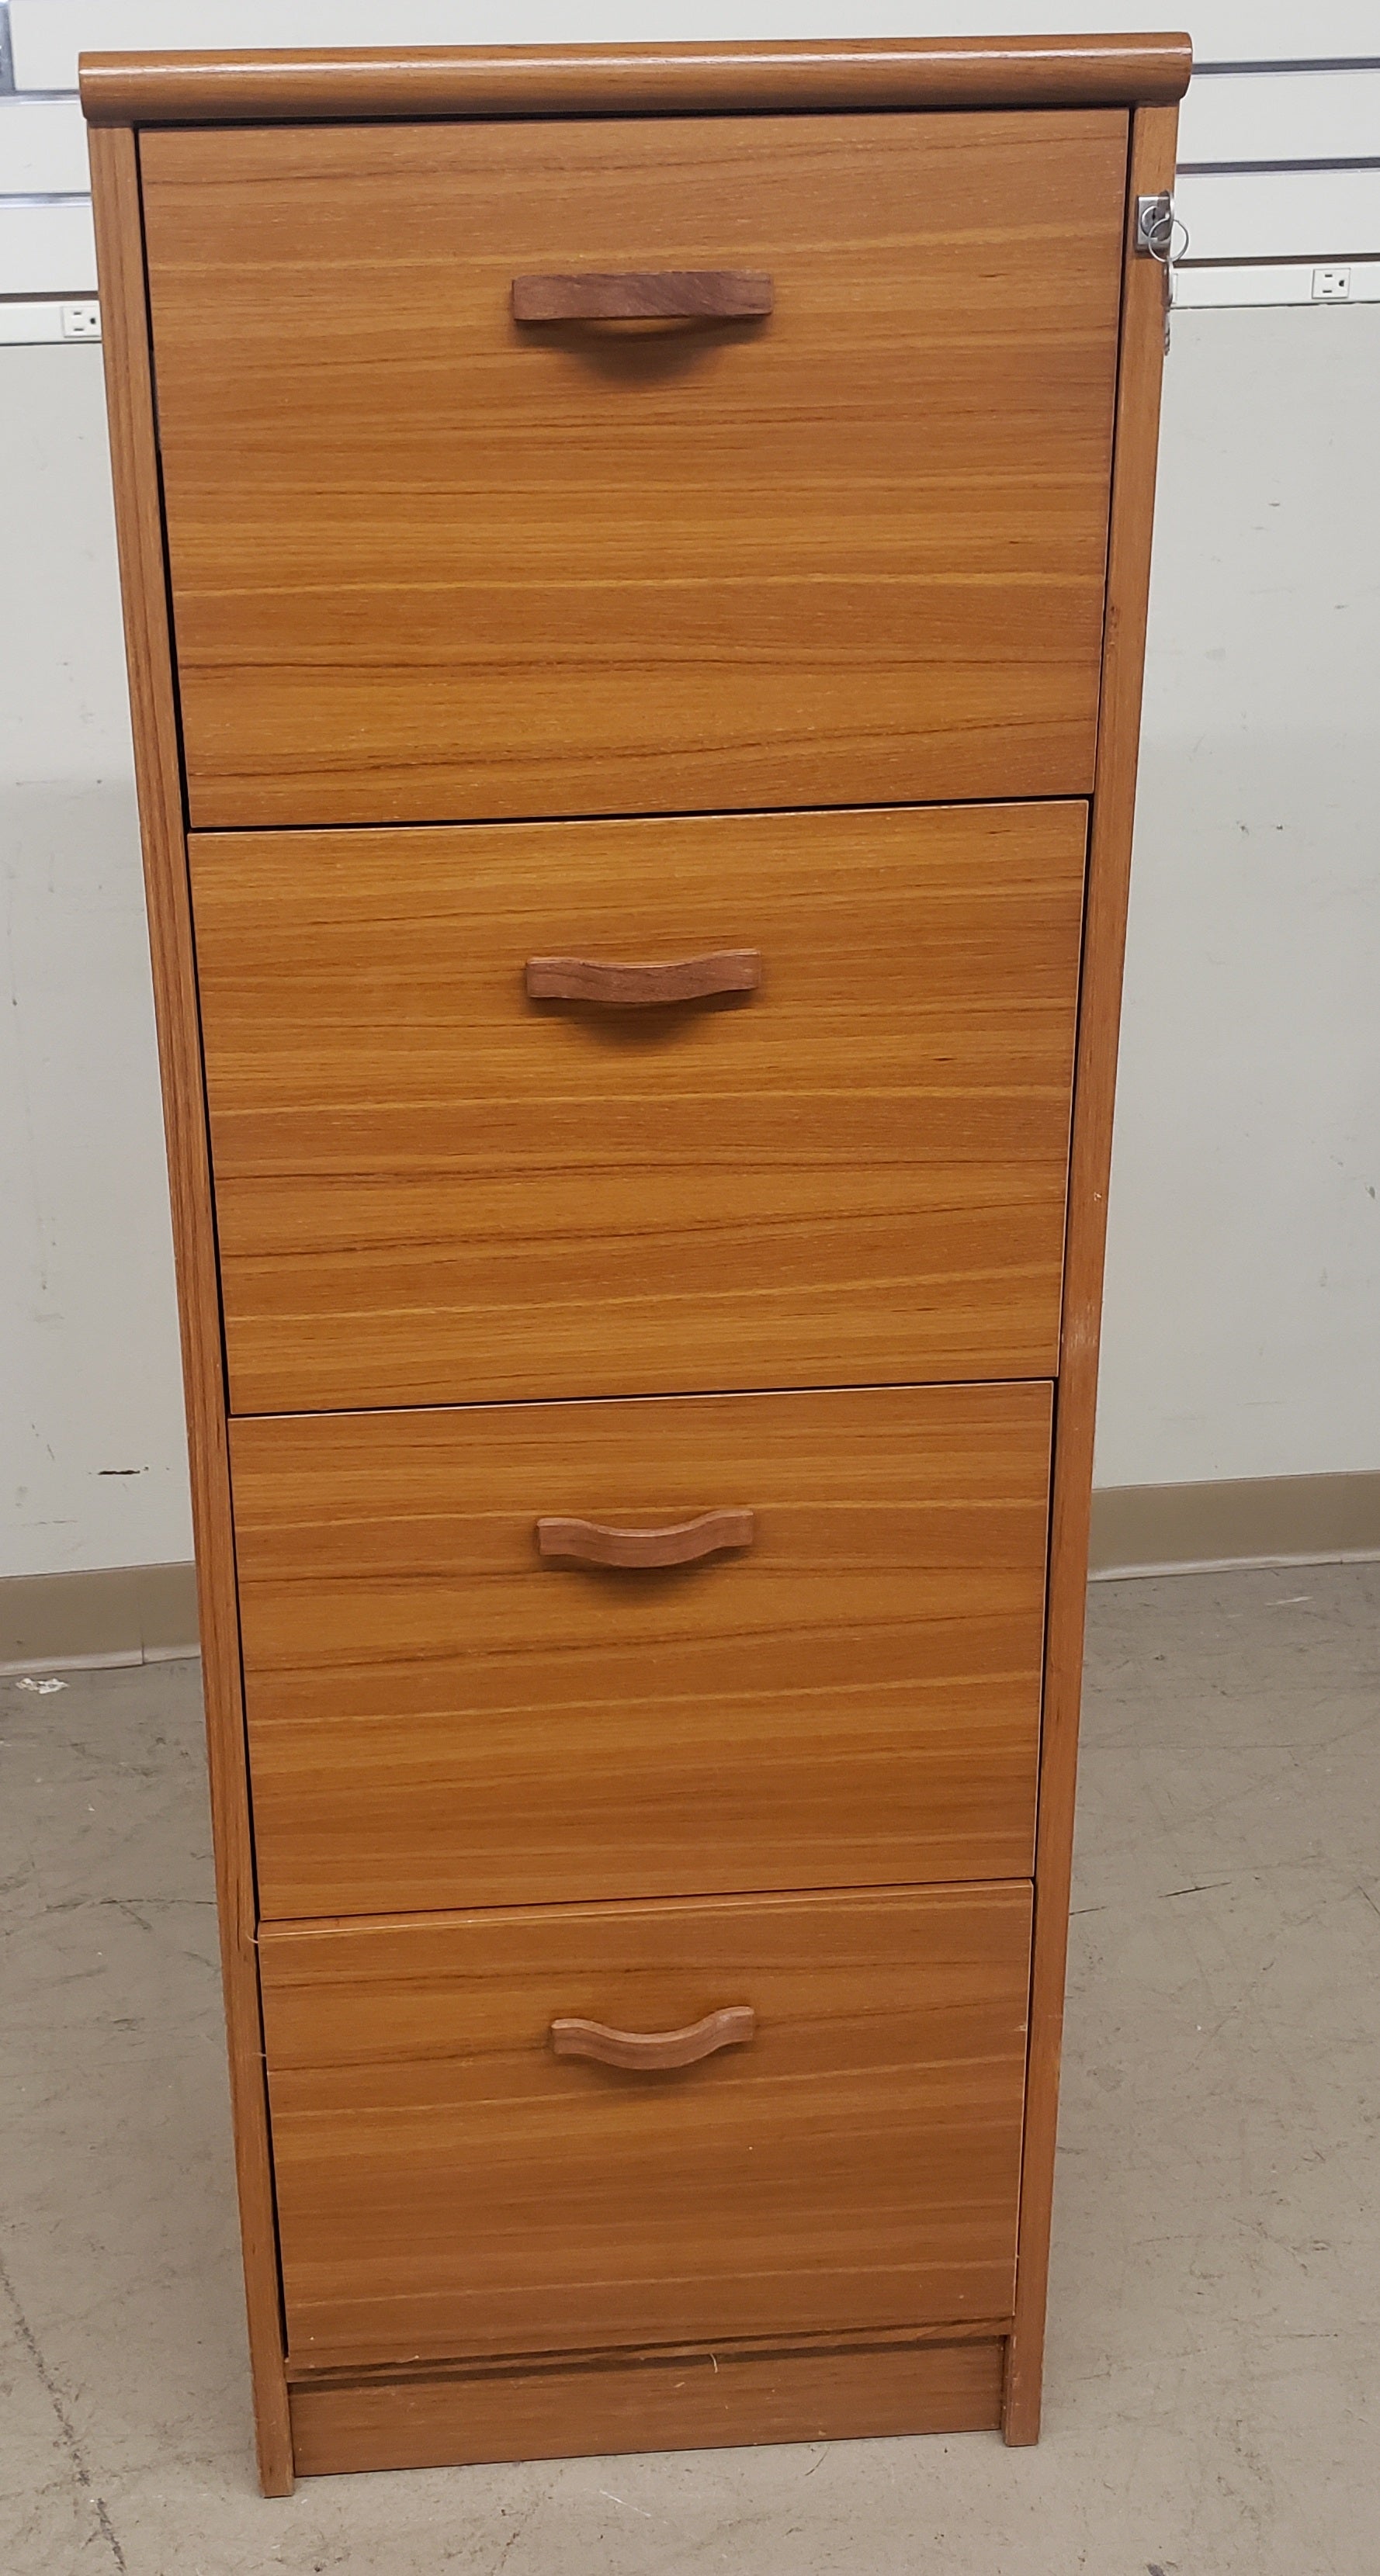 Teak four drawer vertical locking filing cabinet. Two keys available lock all 4 drawers. Build-in file folder handging rails.
Excellent vintage condition.